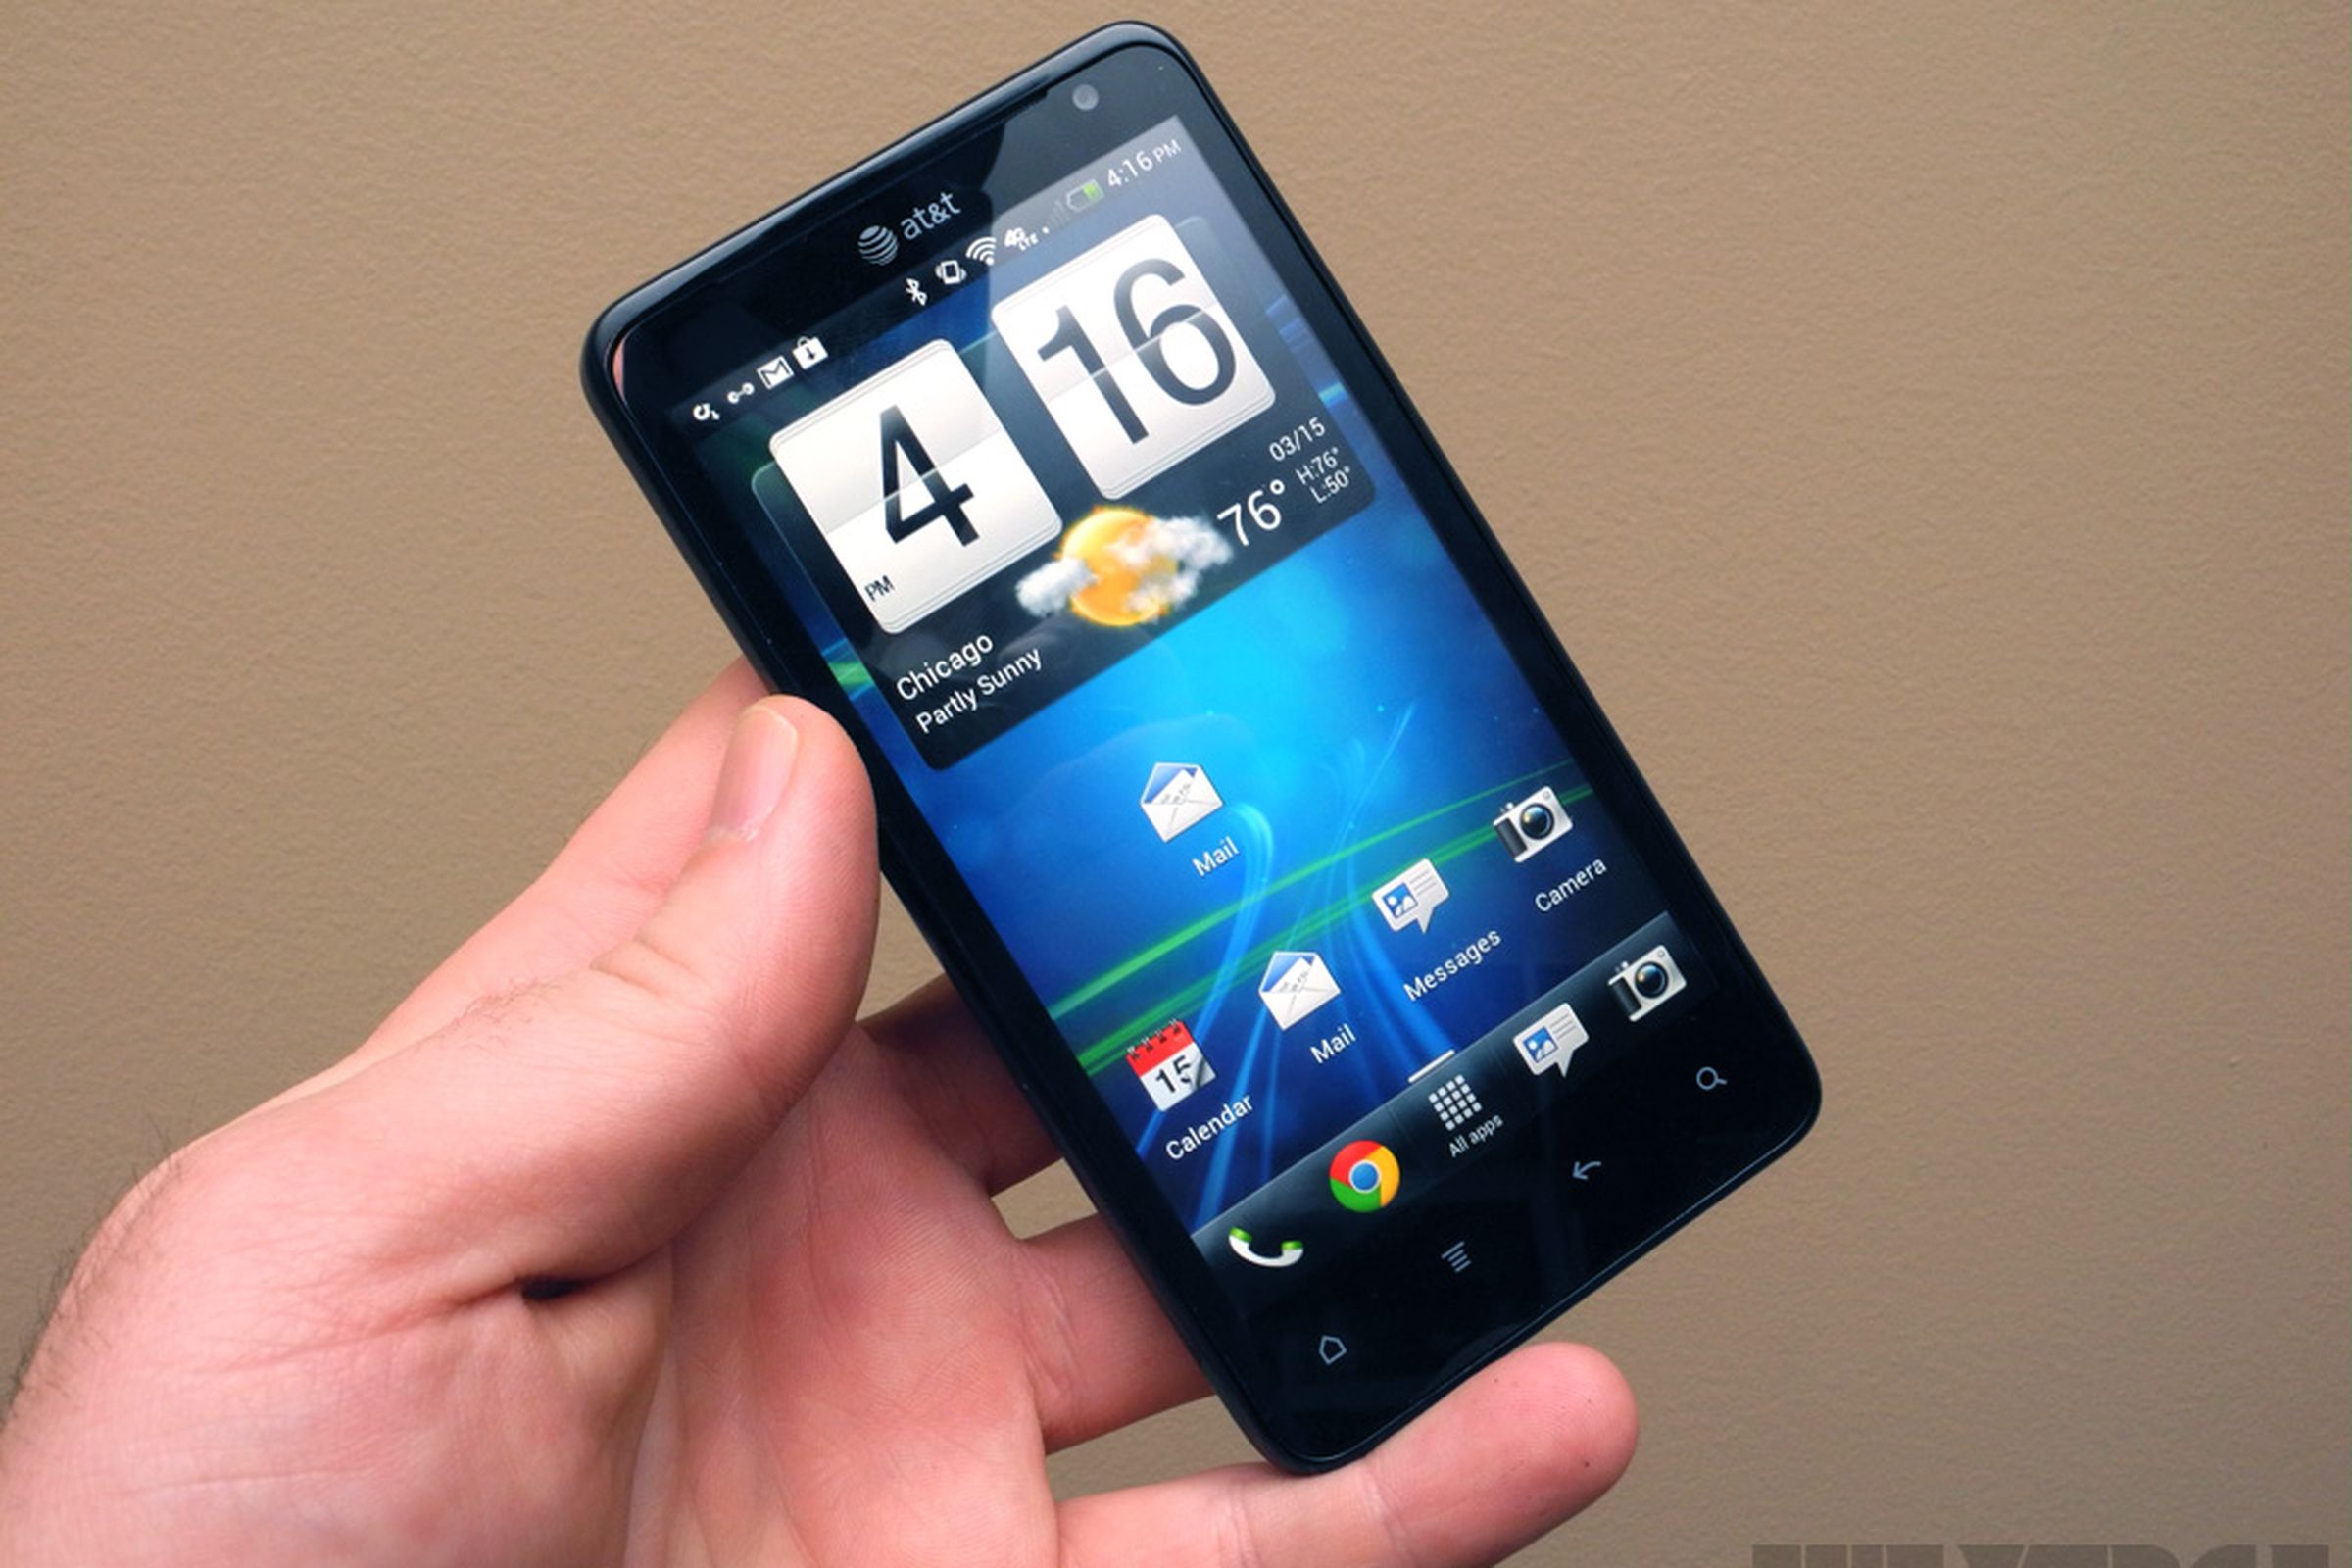 HTC Vivid Android 4.0 update hands-on